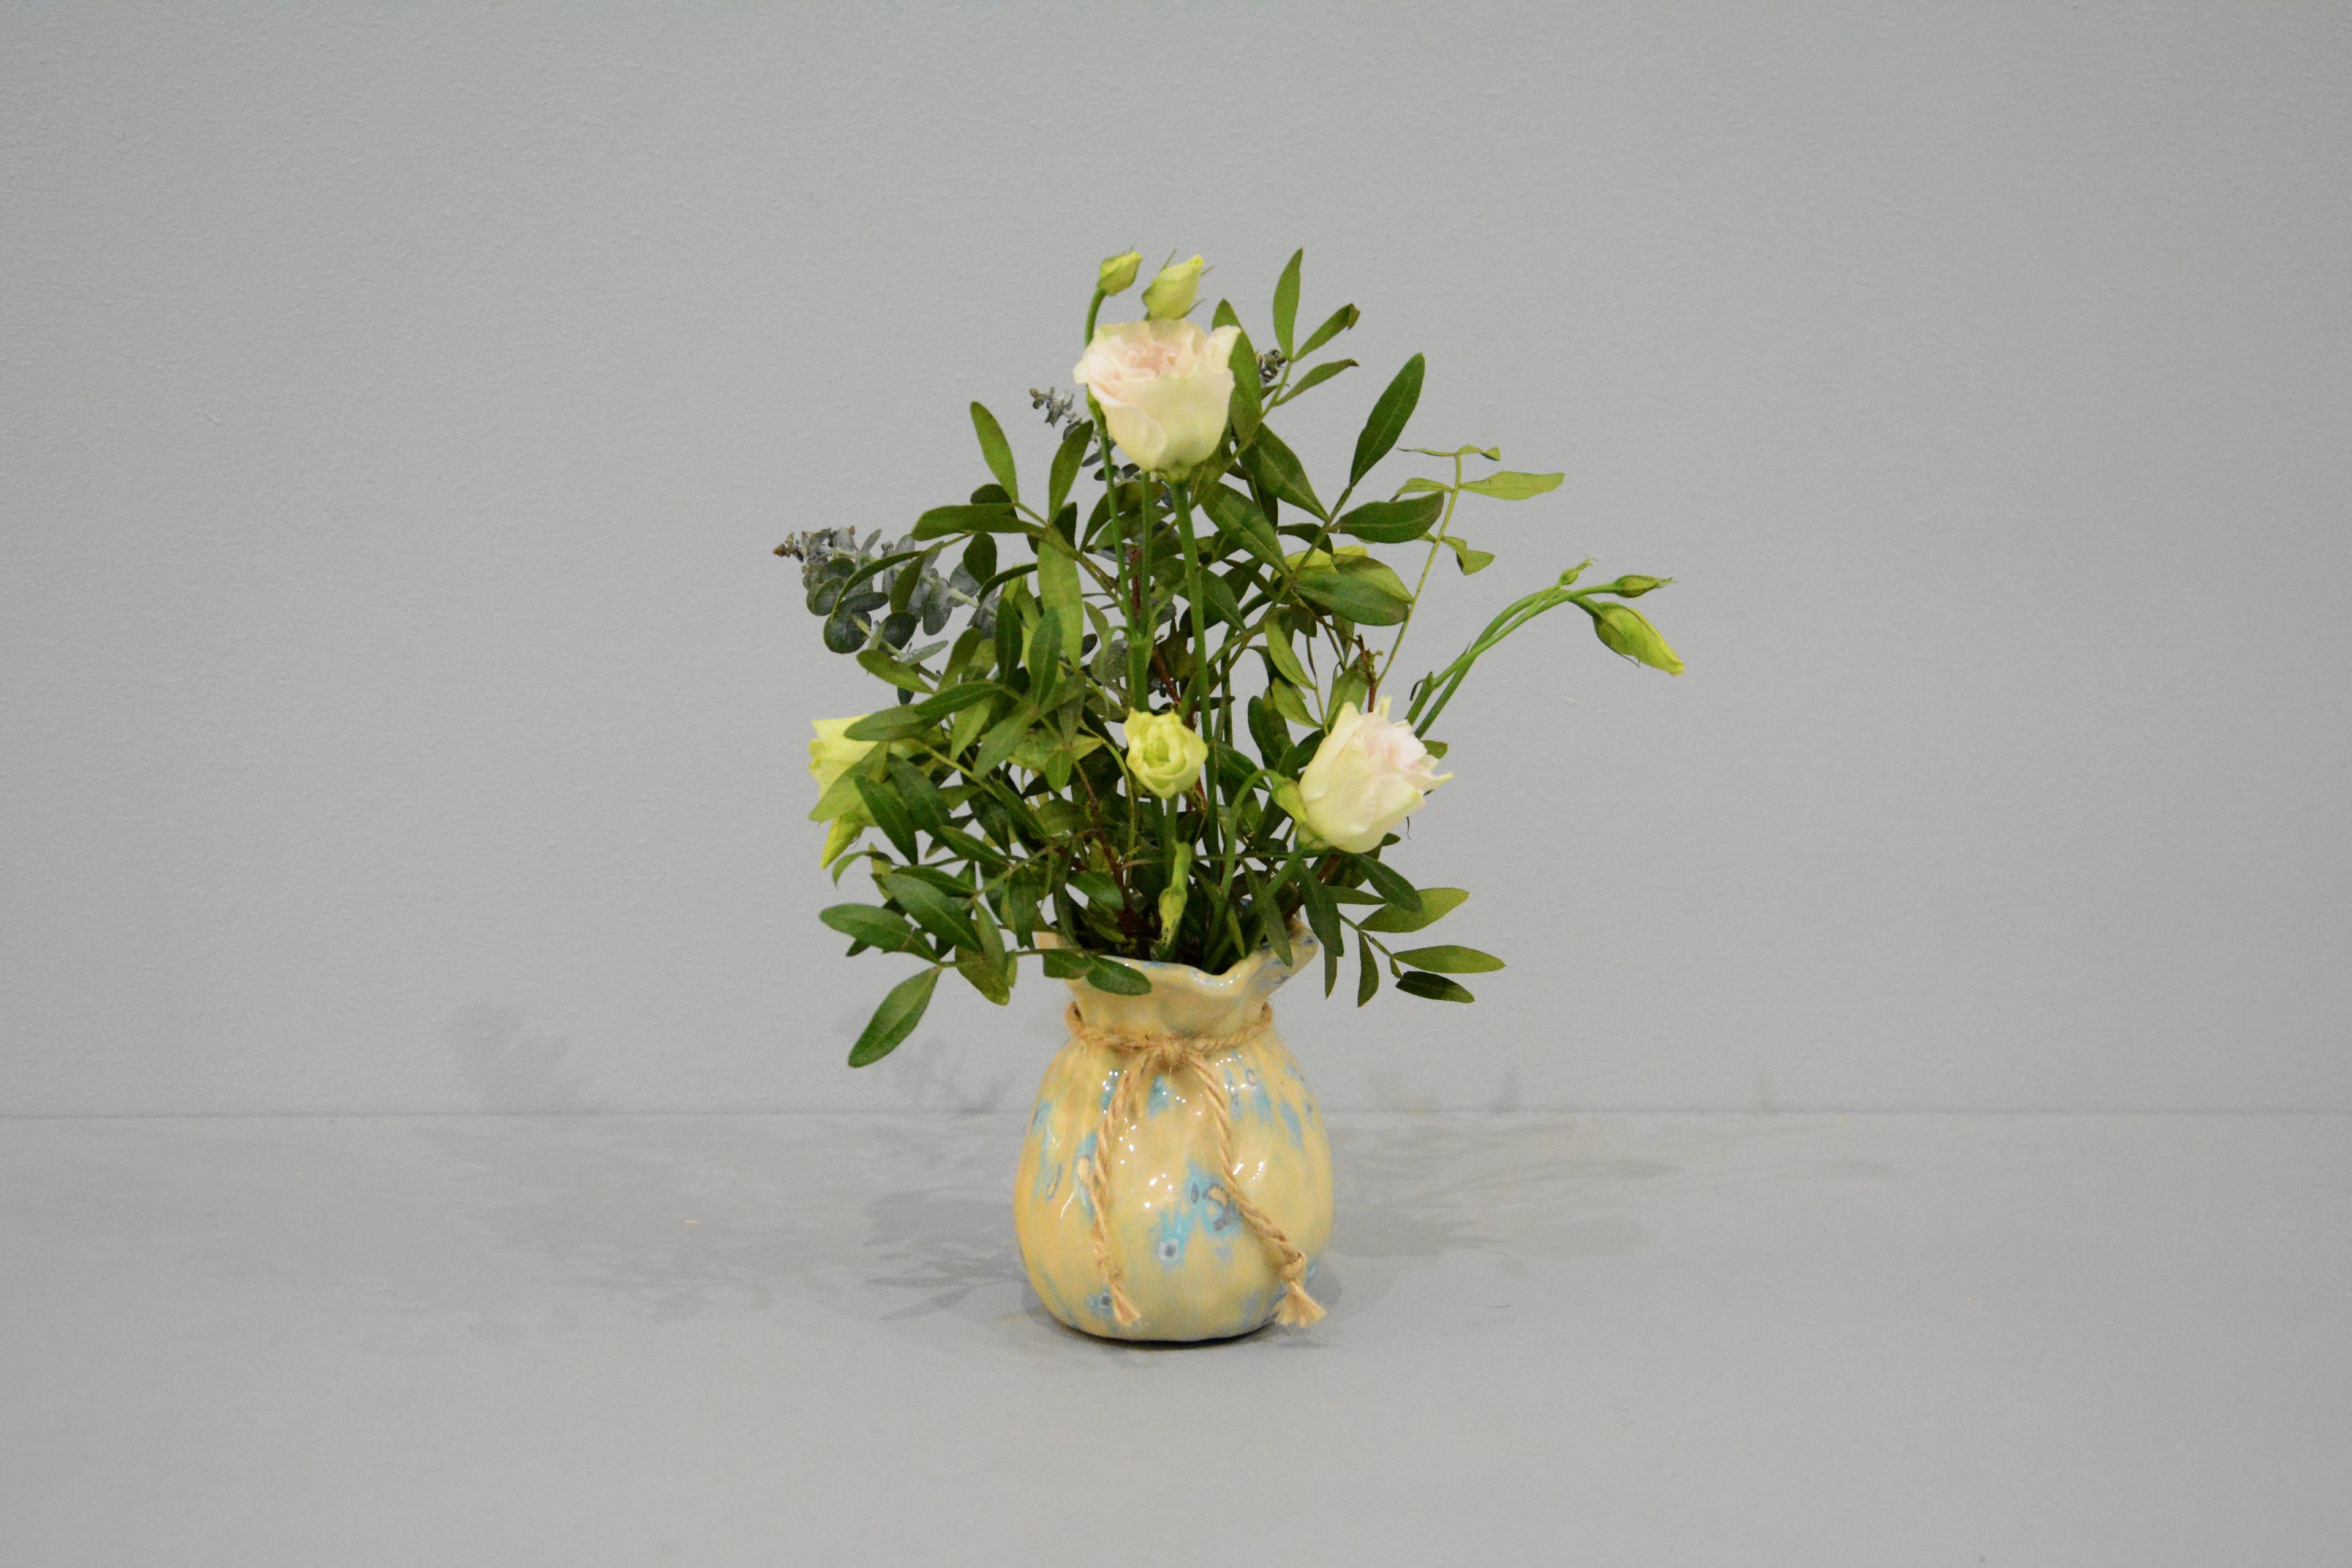 Small Vase or flowers «Beige Bagful», height - 9 cm, color - beige. Photo 1413.